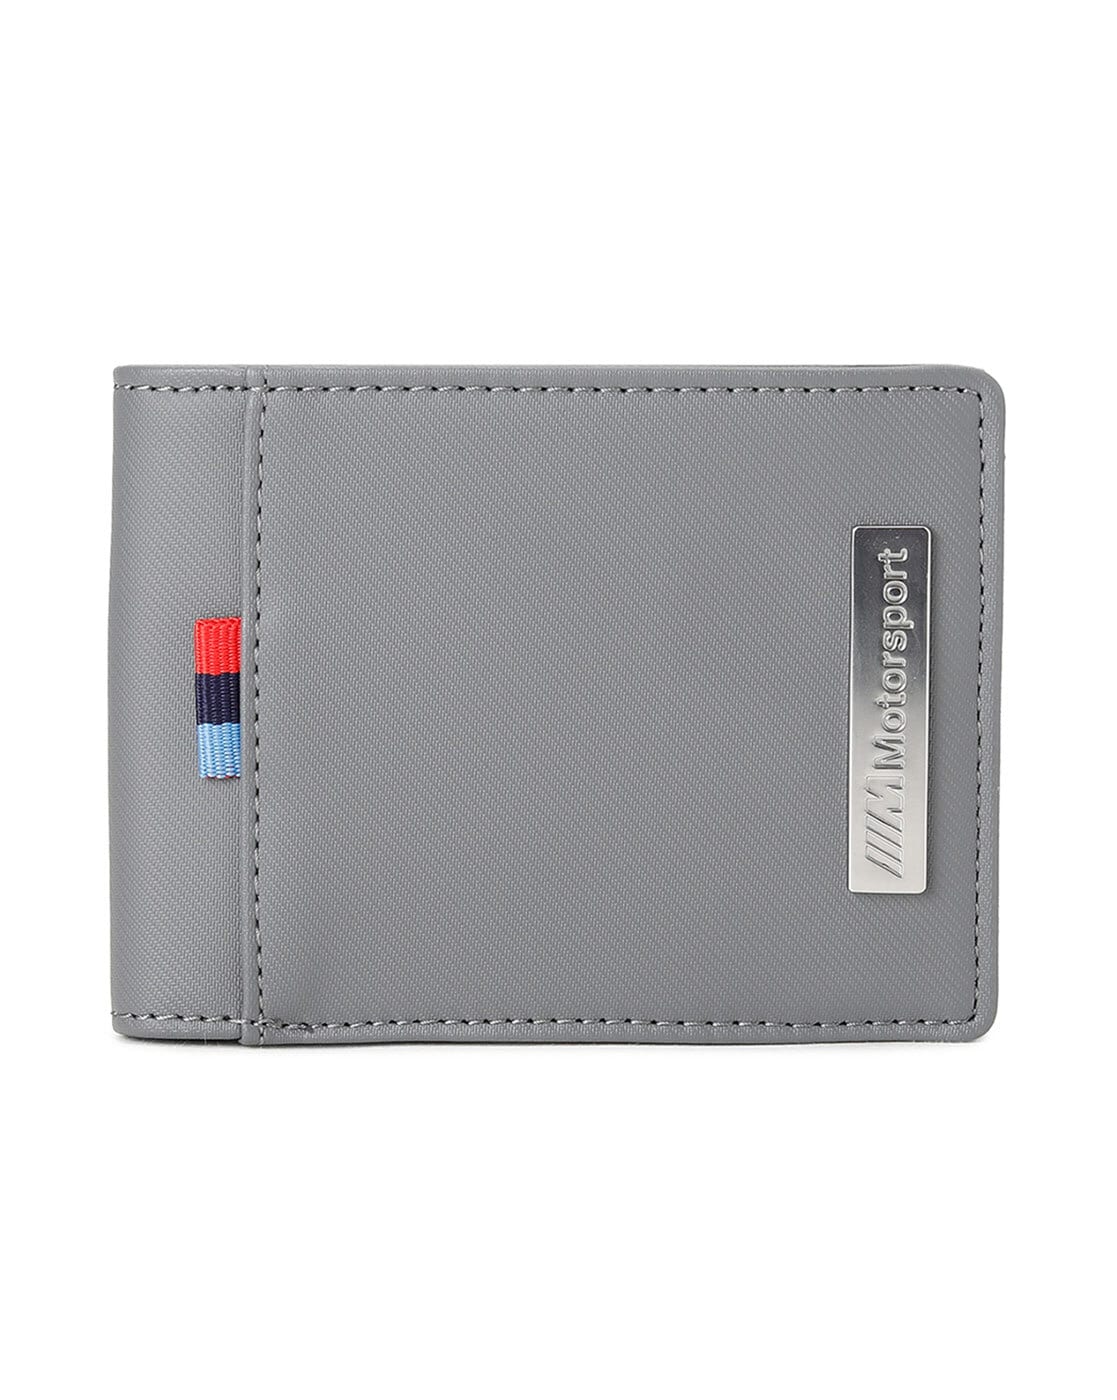 Buy BMW Men's Leather Wallet [Black] at Amazon.in